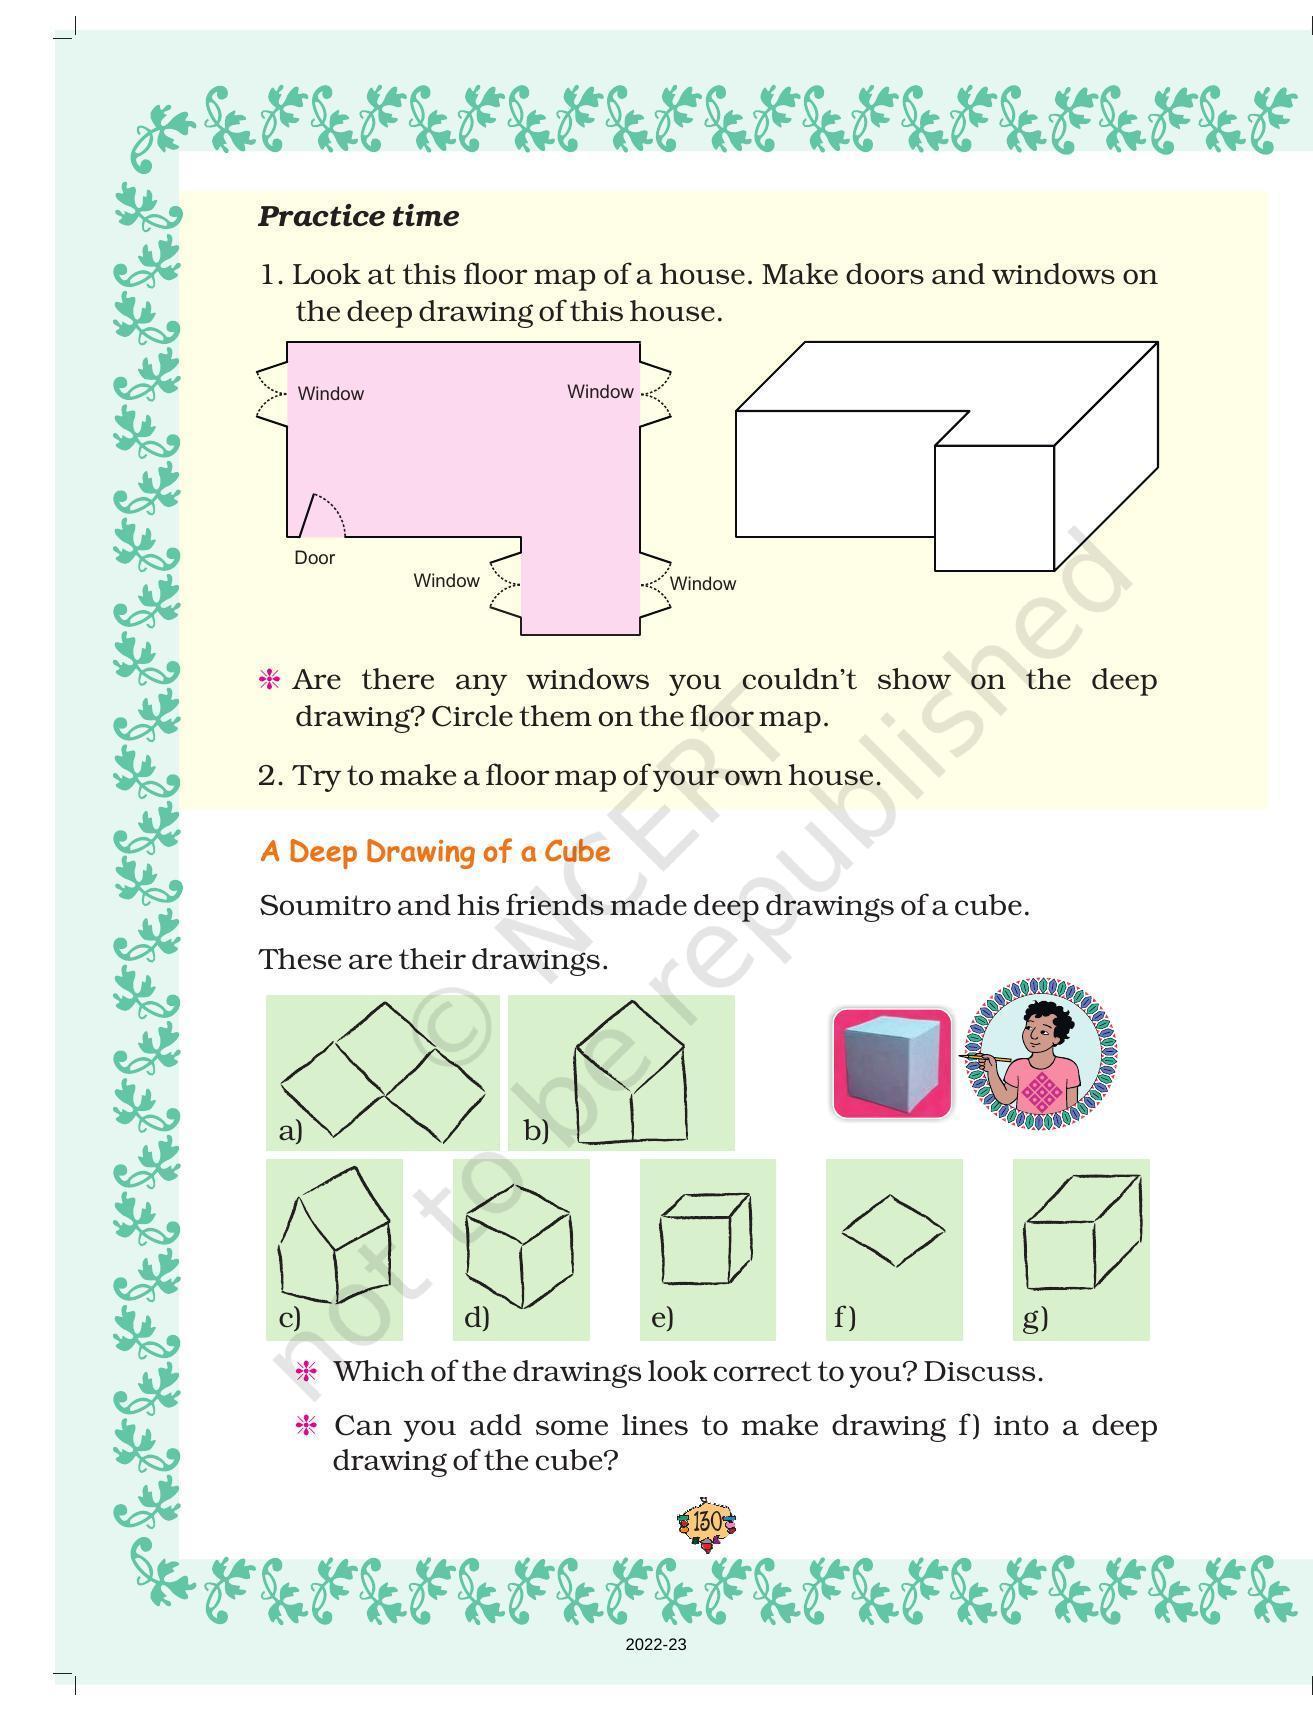 NCERT Book for Class 5 Maths Chapter 9 Boxes and Sketches - Page 5